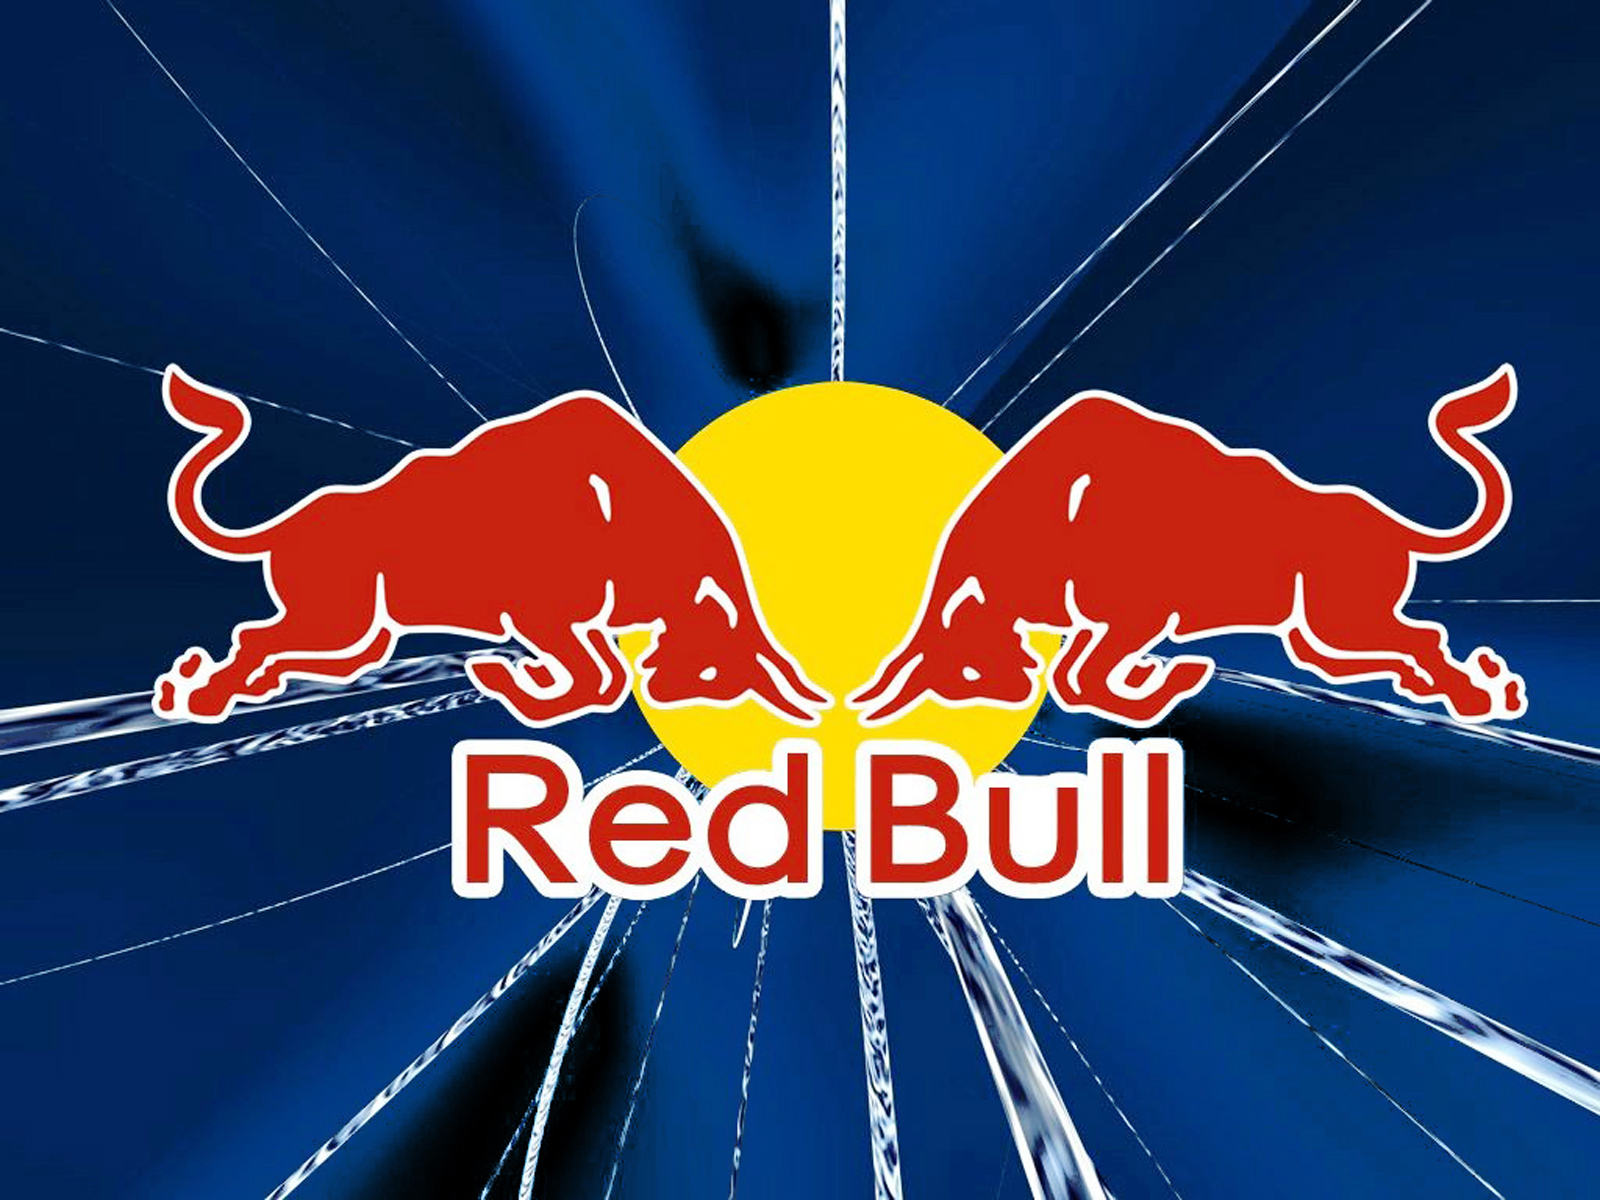 Free Download Download Red Bull Logo Wallpapers 1600x10 For Your Desktop Mobile Tablet Explore 76 Red Bull Wallpaper Hd Red Wallpaper Red Bull Racing Wallpaper New York Red Bulls Wallpaper